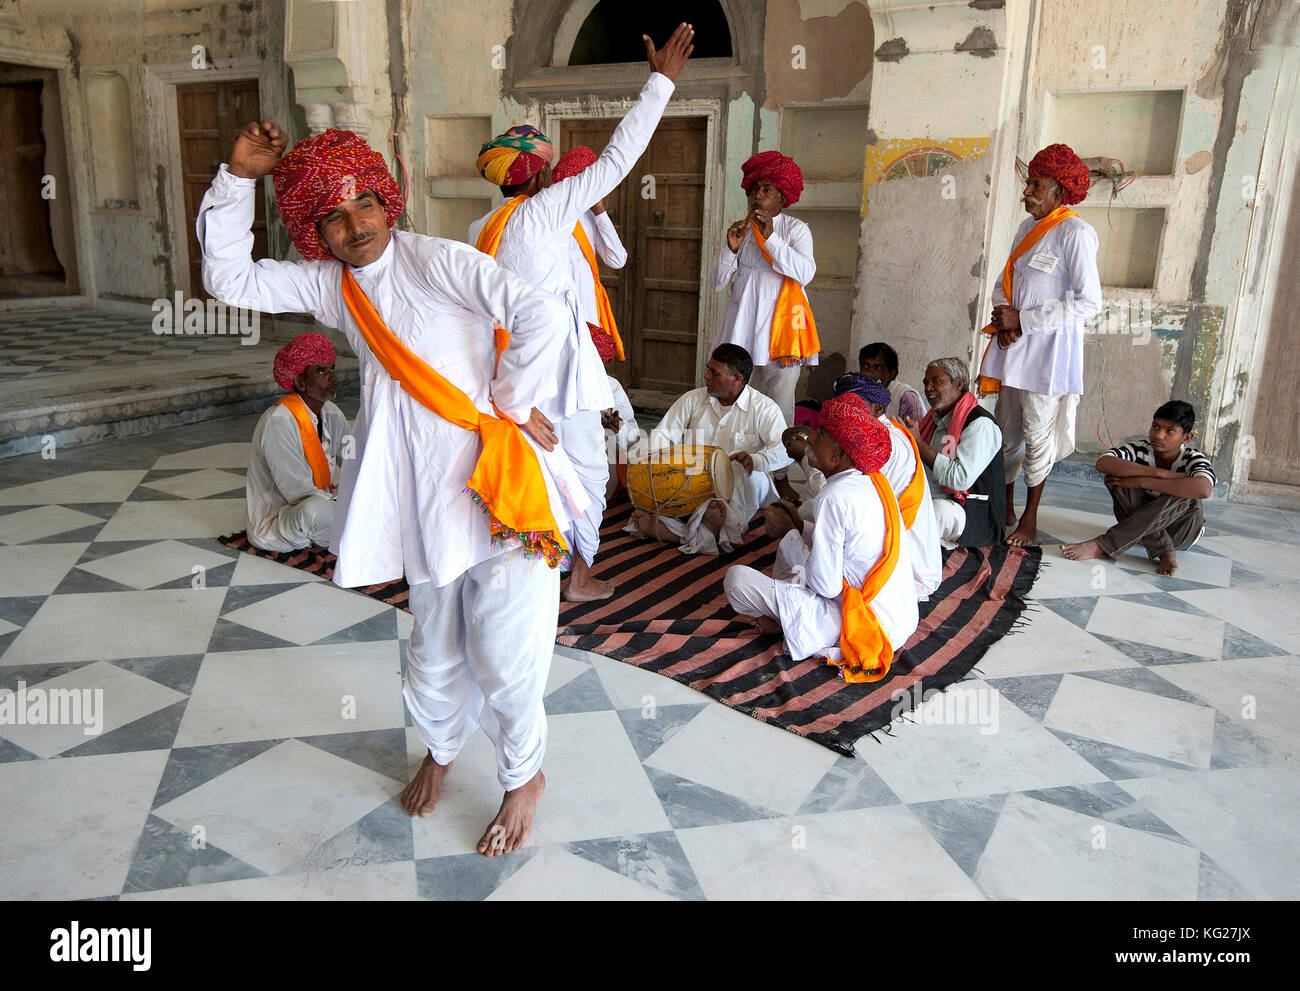 Troup of Rajasthani dancers and musicians performing traditional dance in 18th century Diggi palace Durbar Hall, Rajasthan, India, Asia Stock Photo